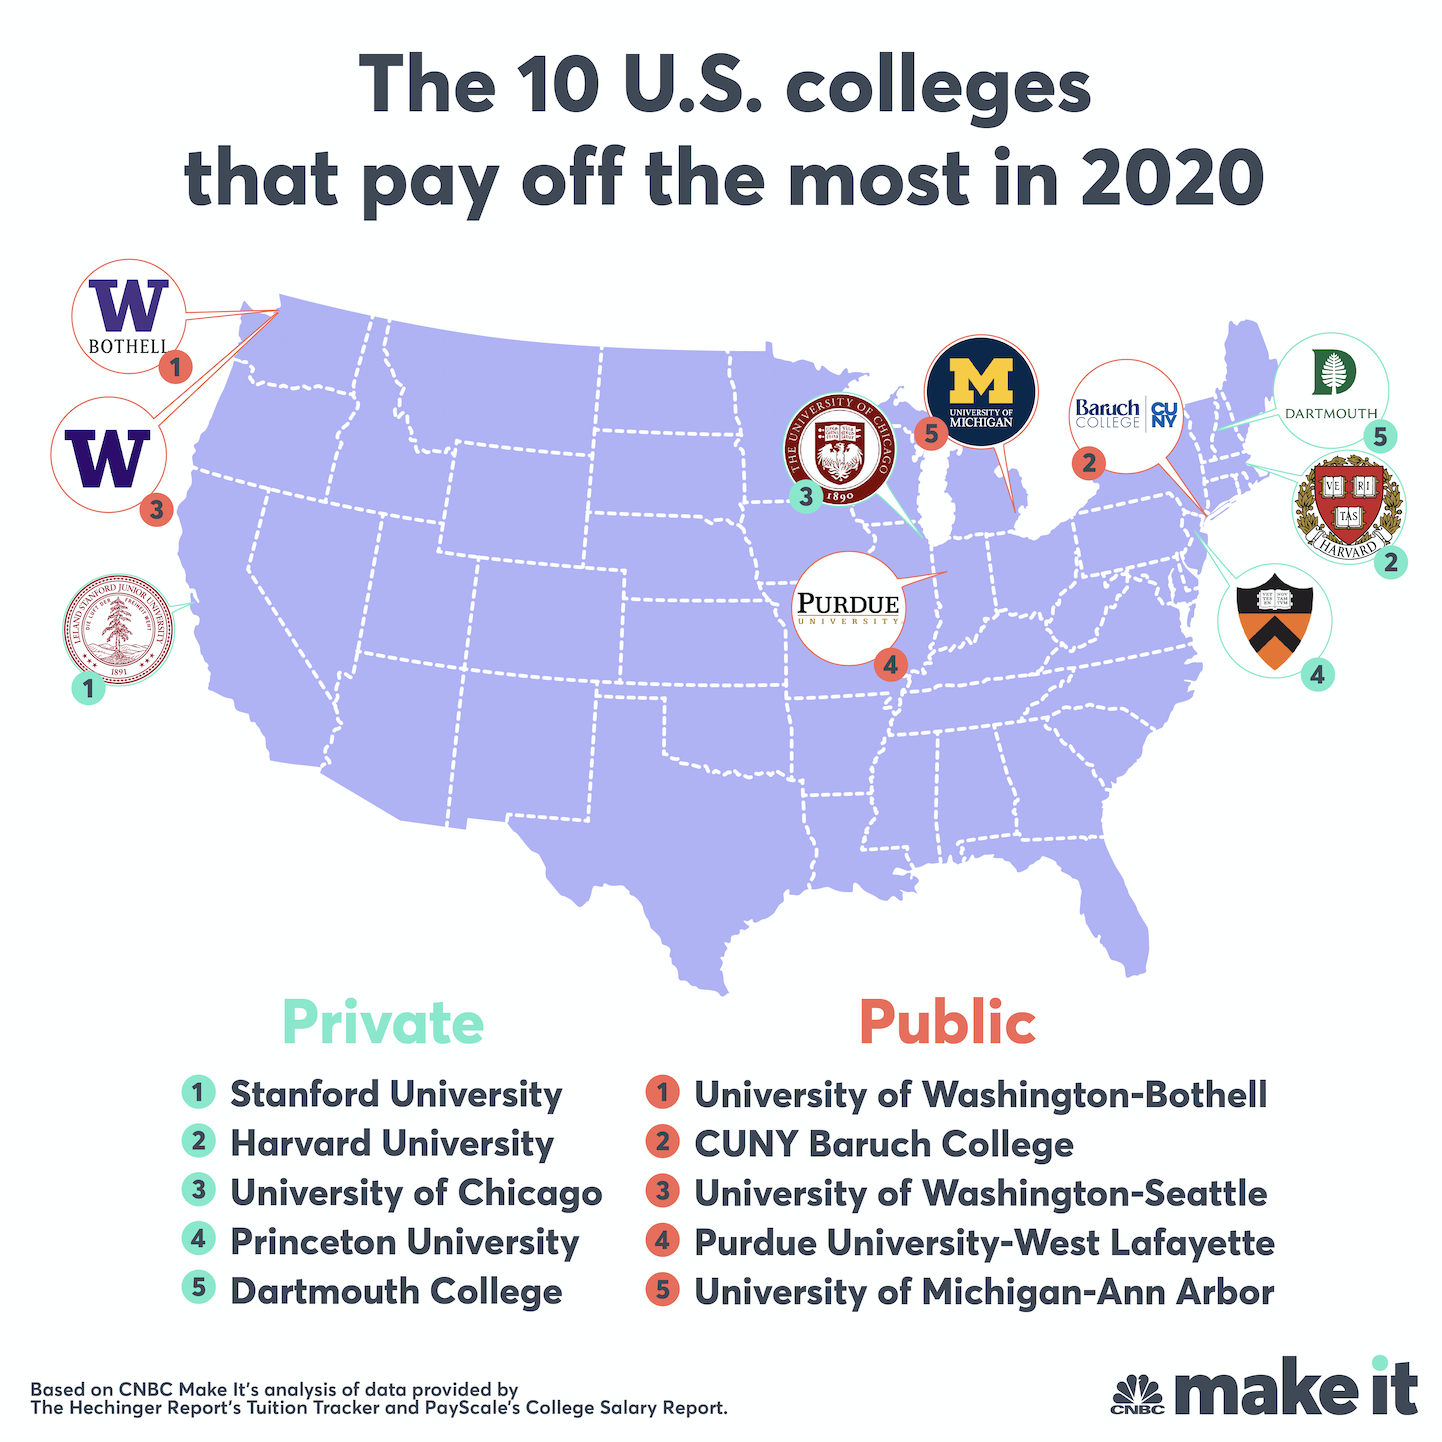 CNBC Make It on Twitter: "These are the top 10 U.S. colleges that pay off the most. Check out the full list of the top 50 universities: https://t.co/IJ6cRPCBGh https://t.co/NSILI1ZDcS" / Twitter